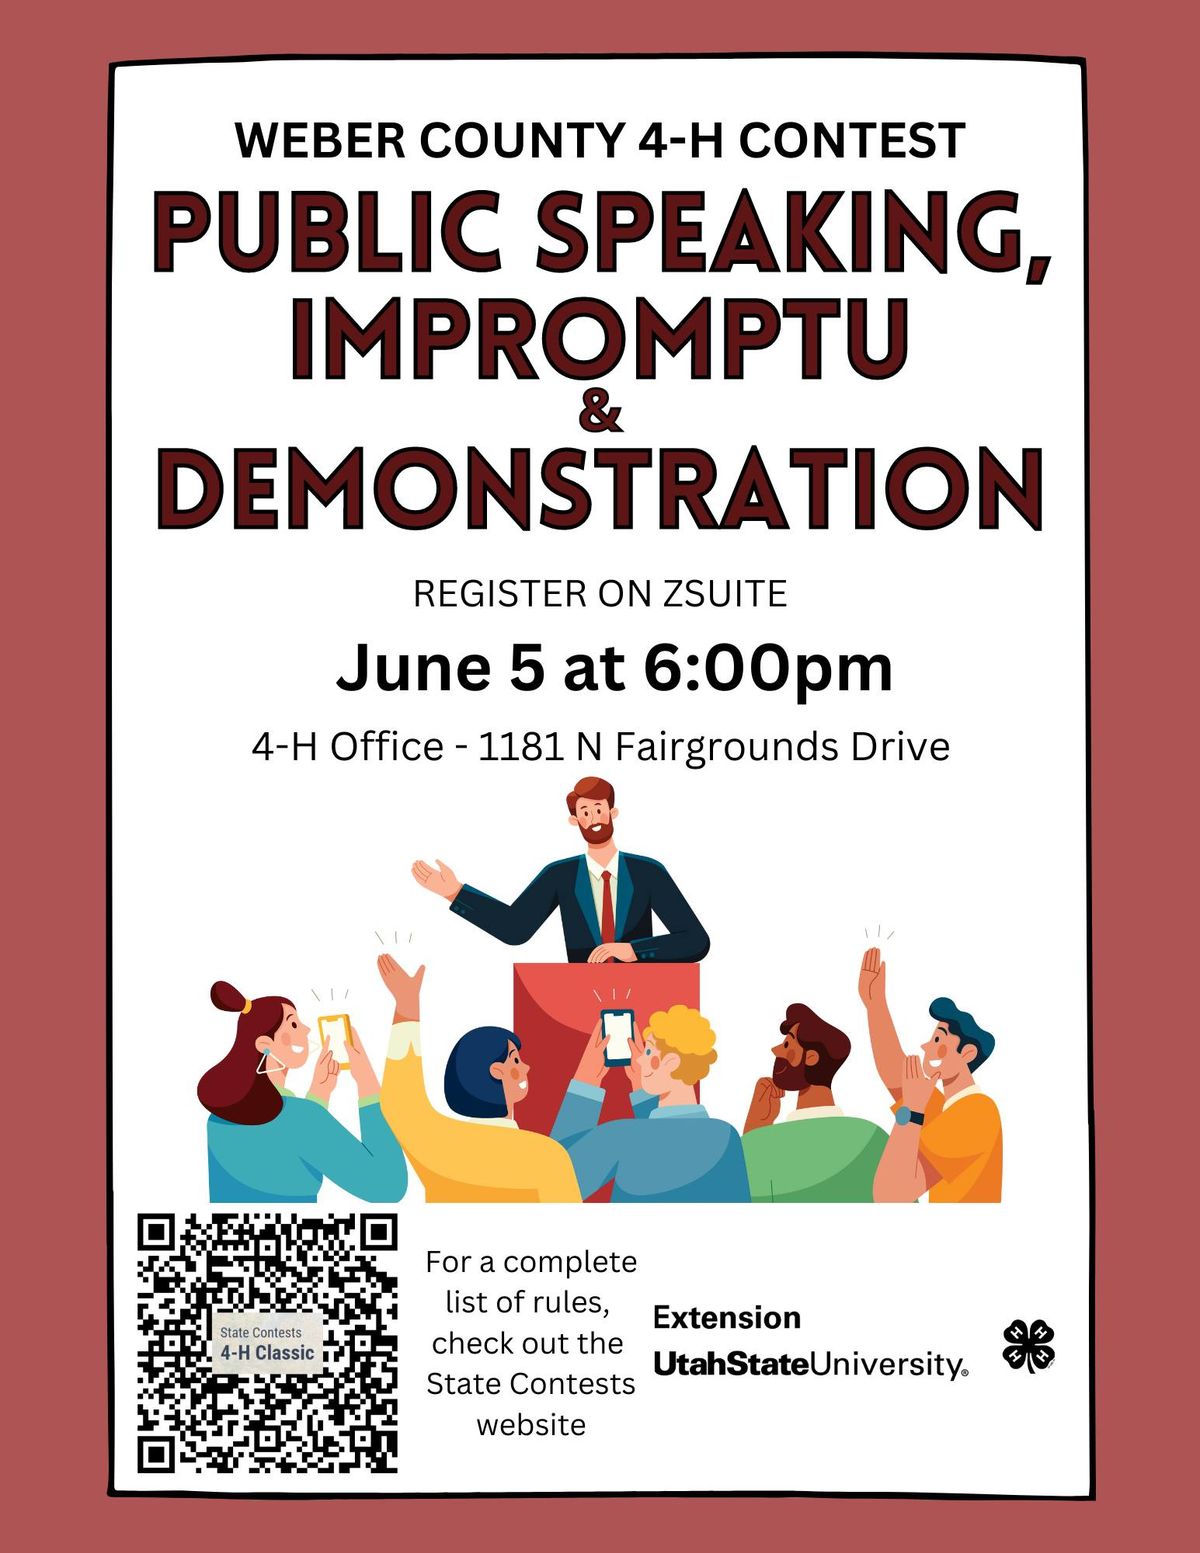 4-H Public Speaking, Impromptu and Demonstration Contest